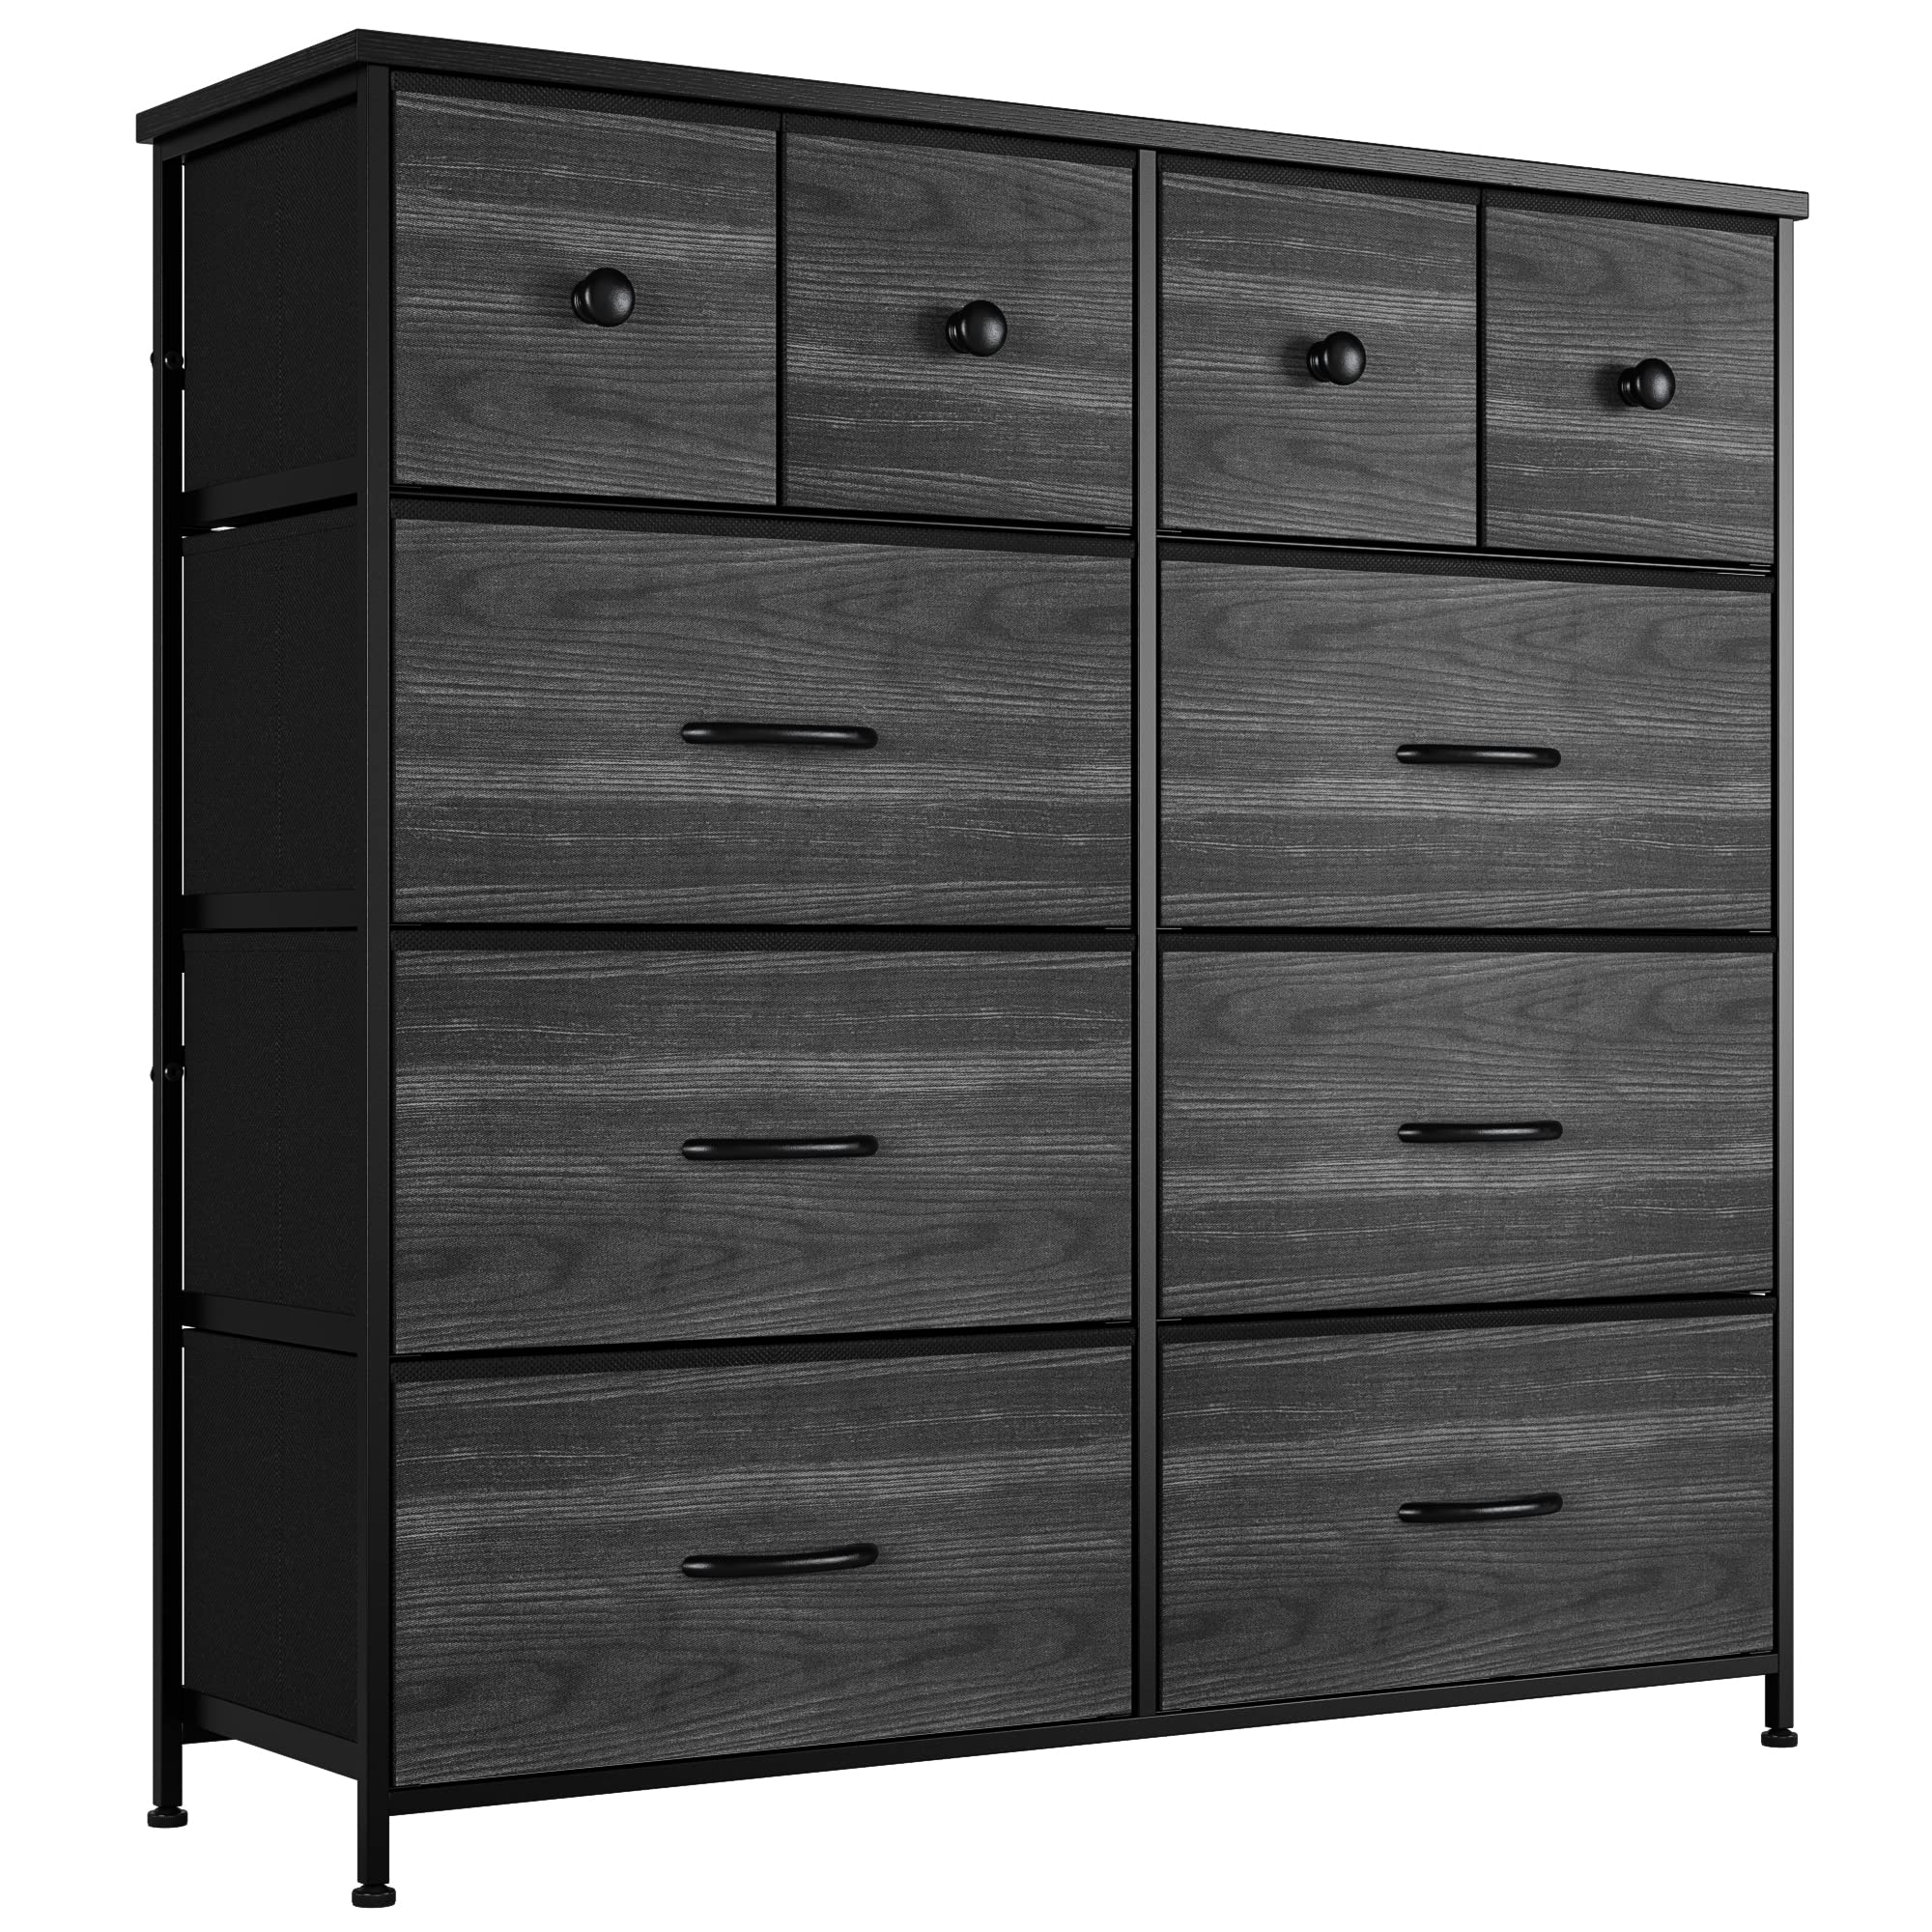 Nicehill Dresser for Bedroom with 10 Drawers, Storage Drawer Organizer, Tall Chest of Drawers for Closet, Clothes, Kids, Baby, L